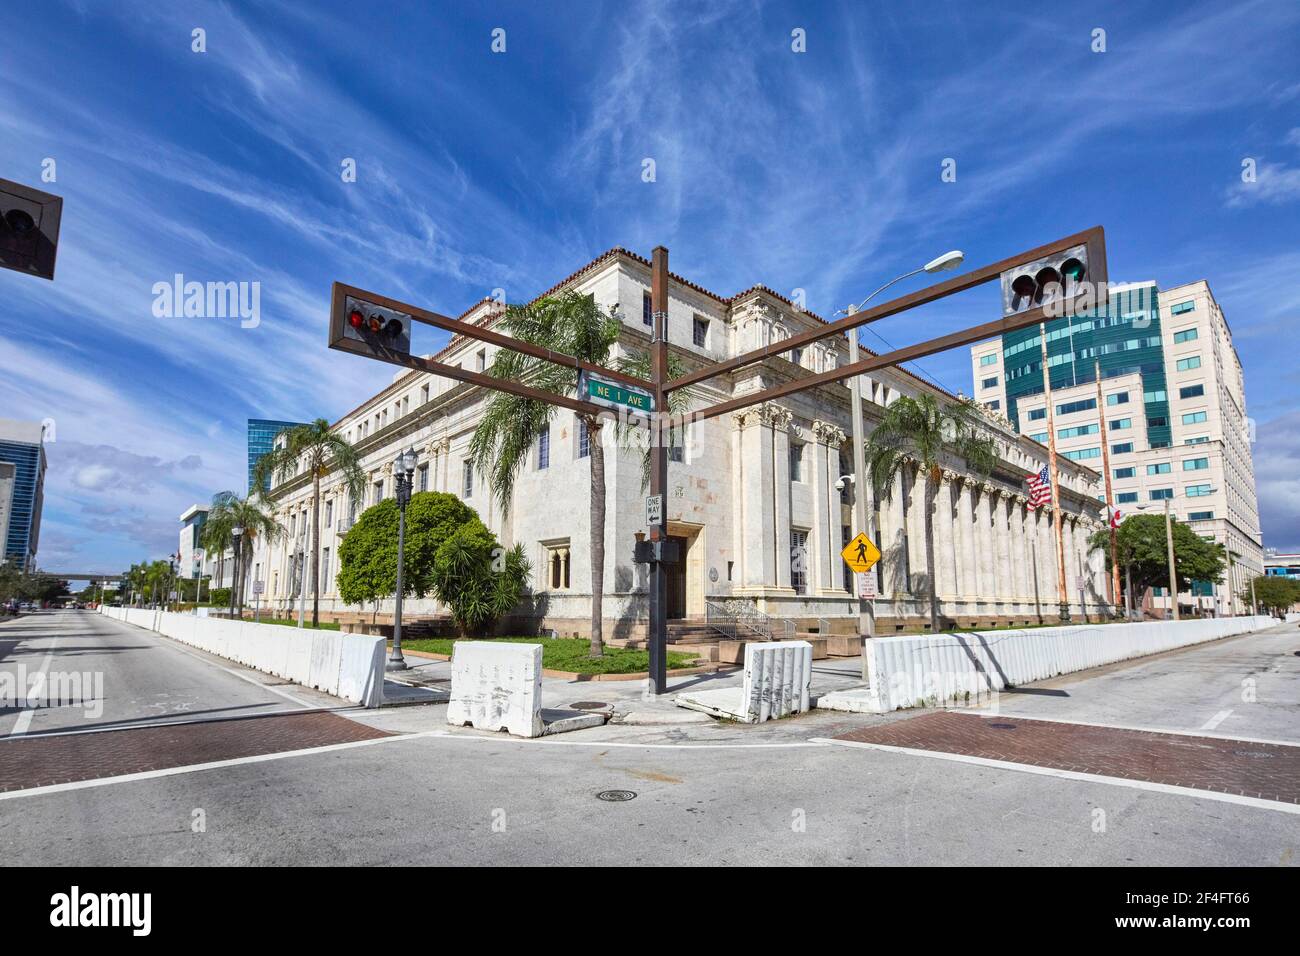 David W Dyer Federal Building and United States Courthouse designed by Carrere & Hastings architectural firm in Miami Florida USA Stock Photo